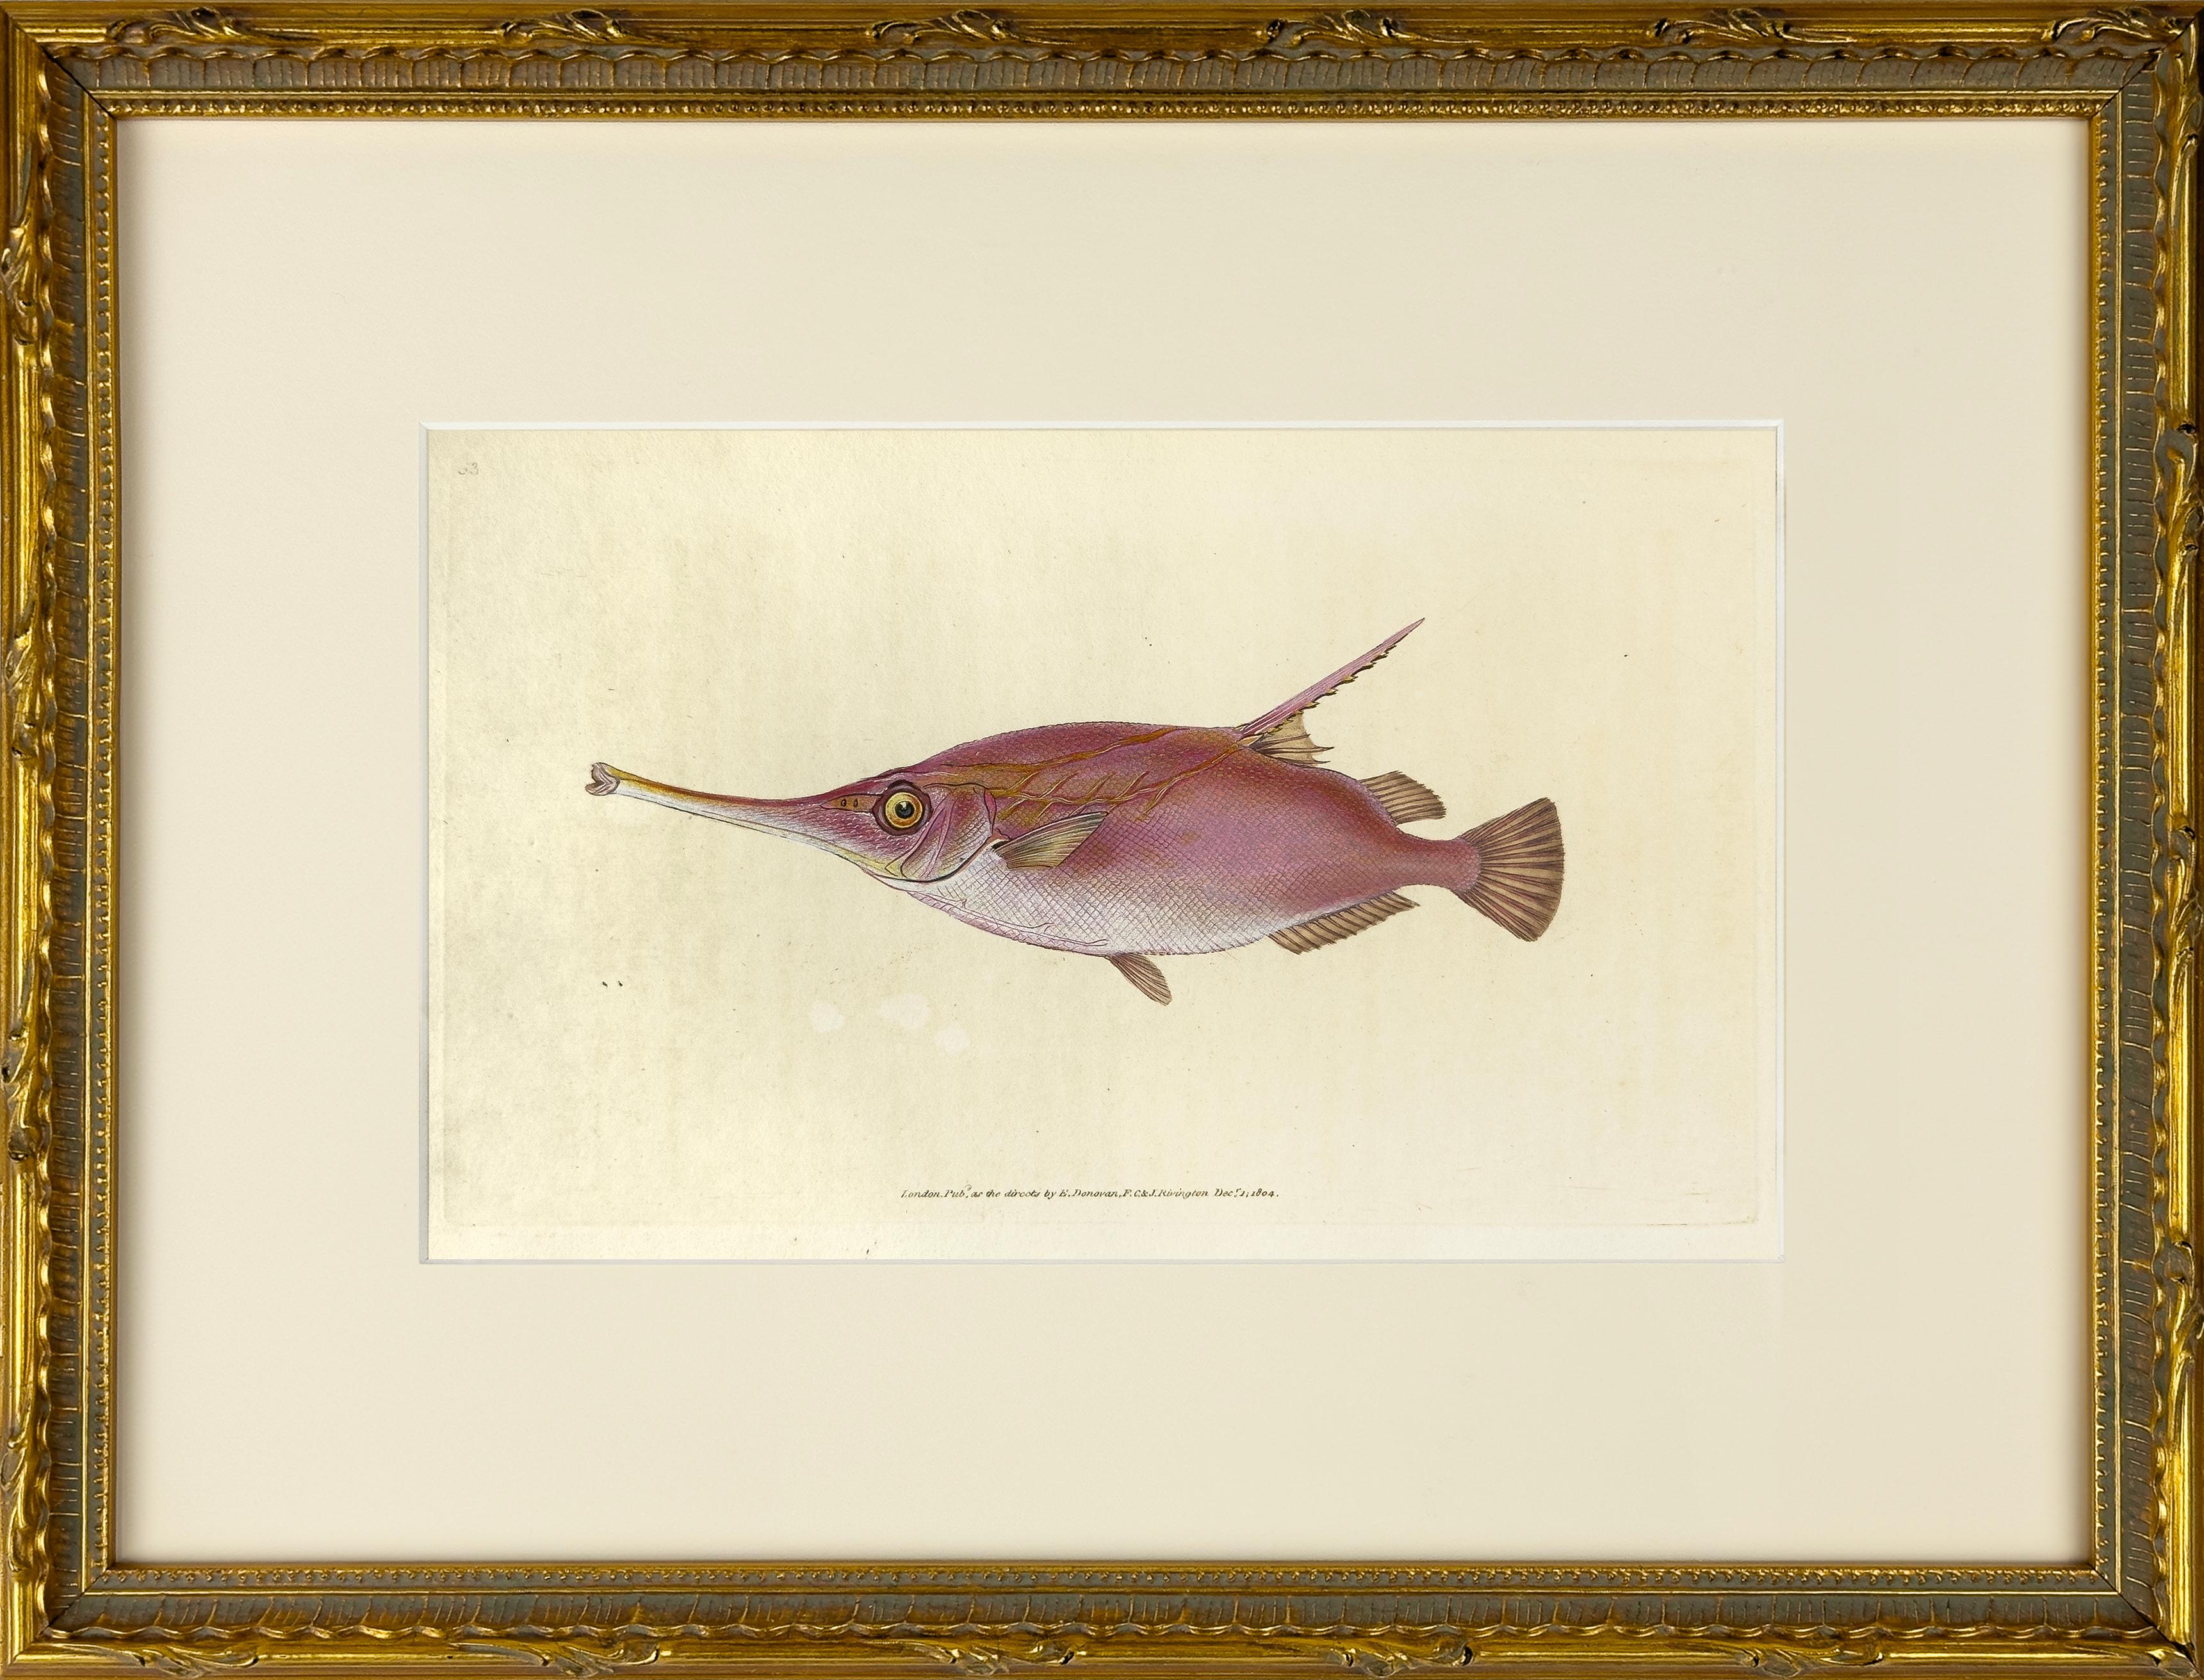 63: Centriscus scolopax, Snipe or Trumpet Fish - Print by Edward Donovan